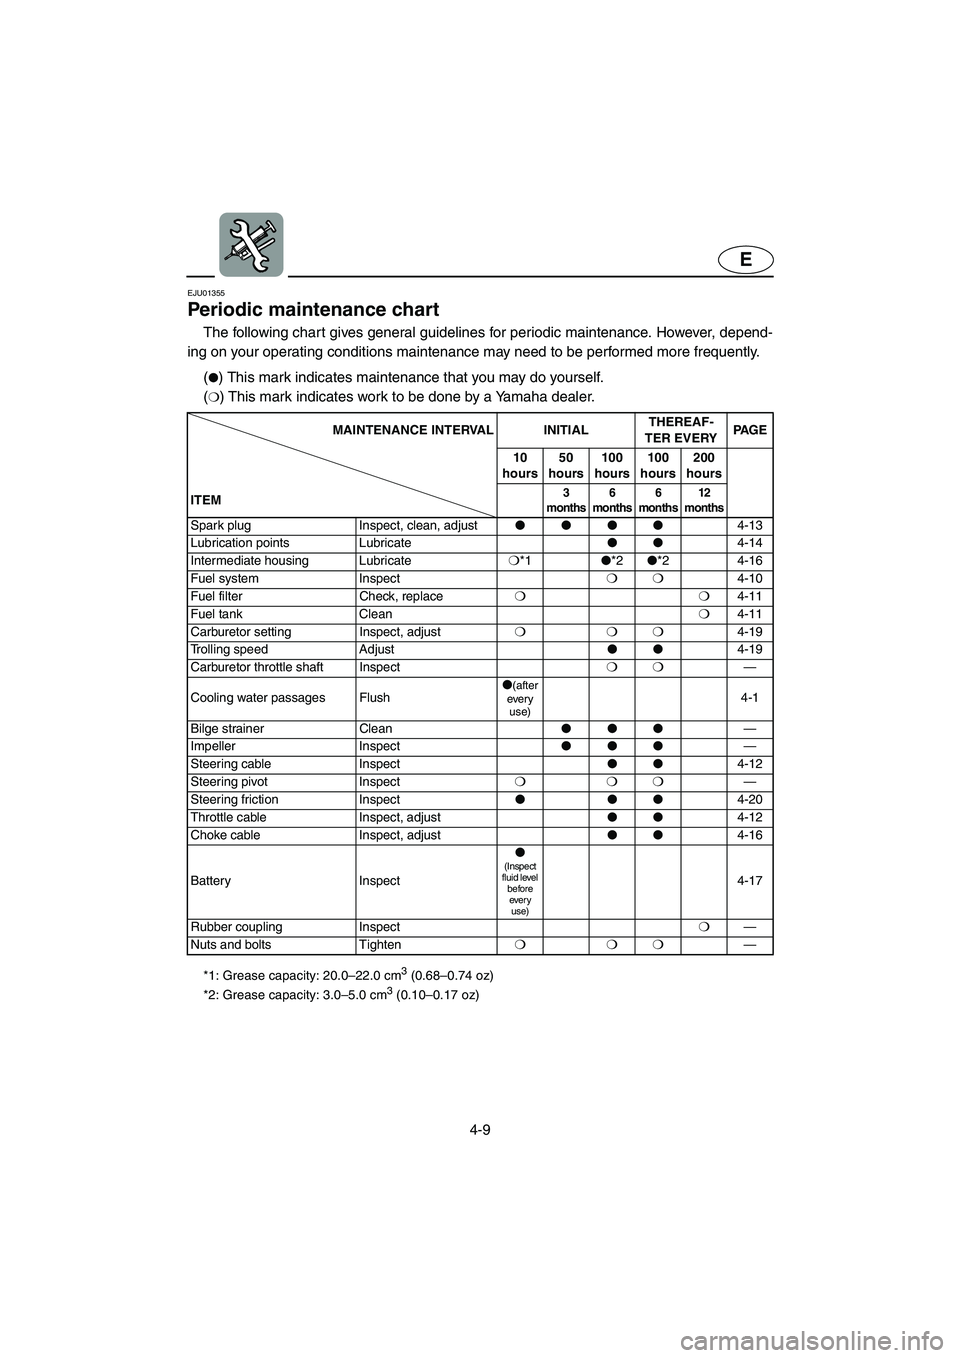 YAMAHA SUPERJET 2002  Owners Manual 4-9
E
EJU01355 
Periodic maintenance chart  
The following chart gives general guidelines for periodic maintenance. However, depend-
ing on your operating conditions maintenance may need to be perform